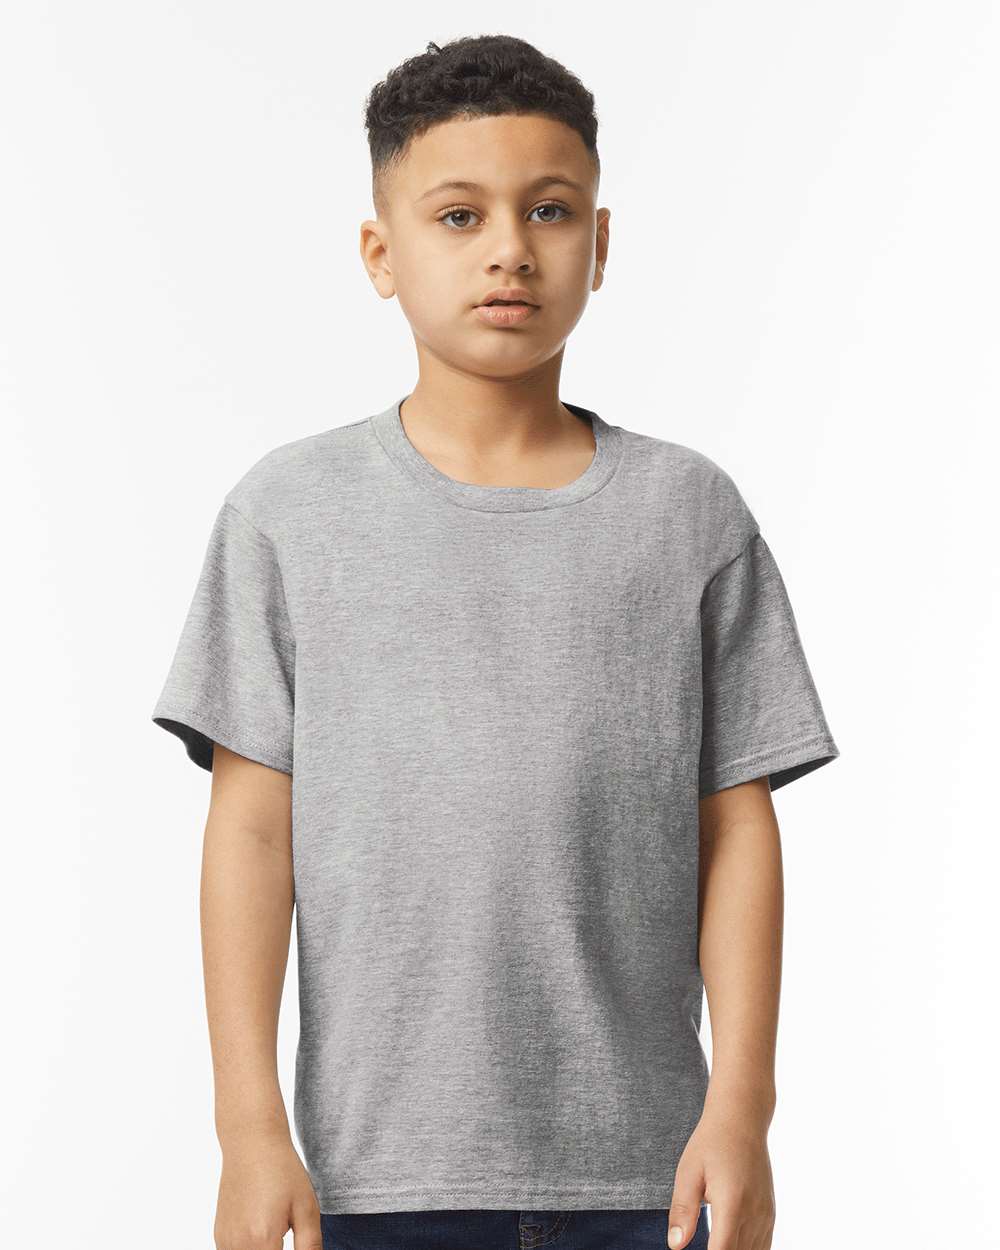 Boy clothes. Young modern child with apparel around, different